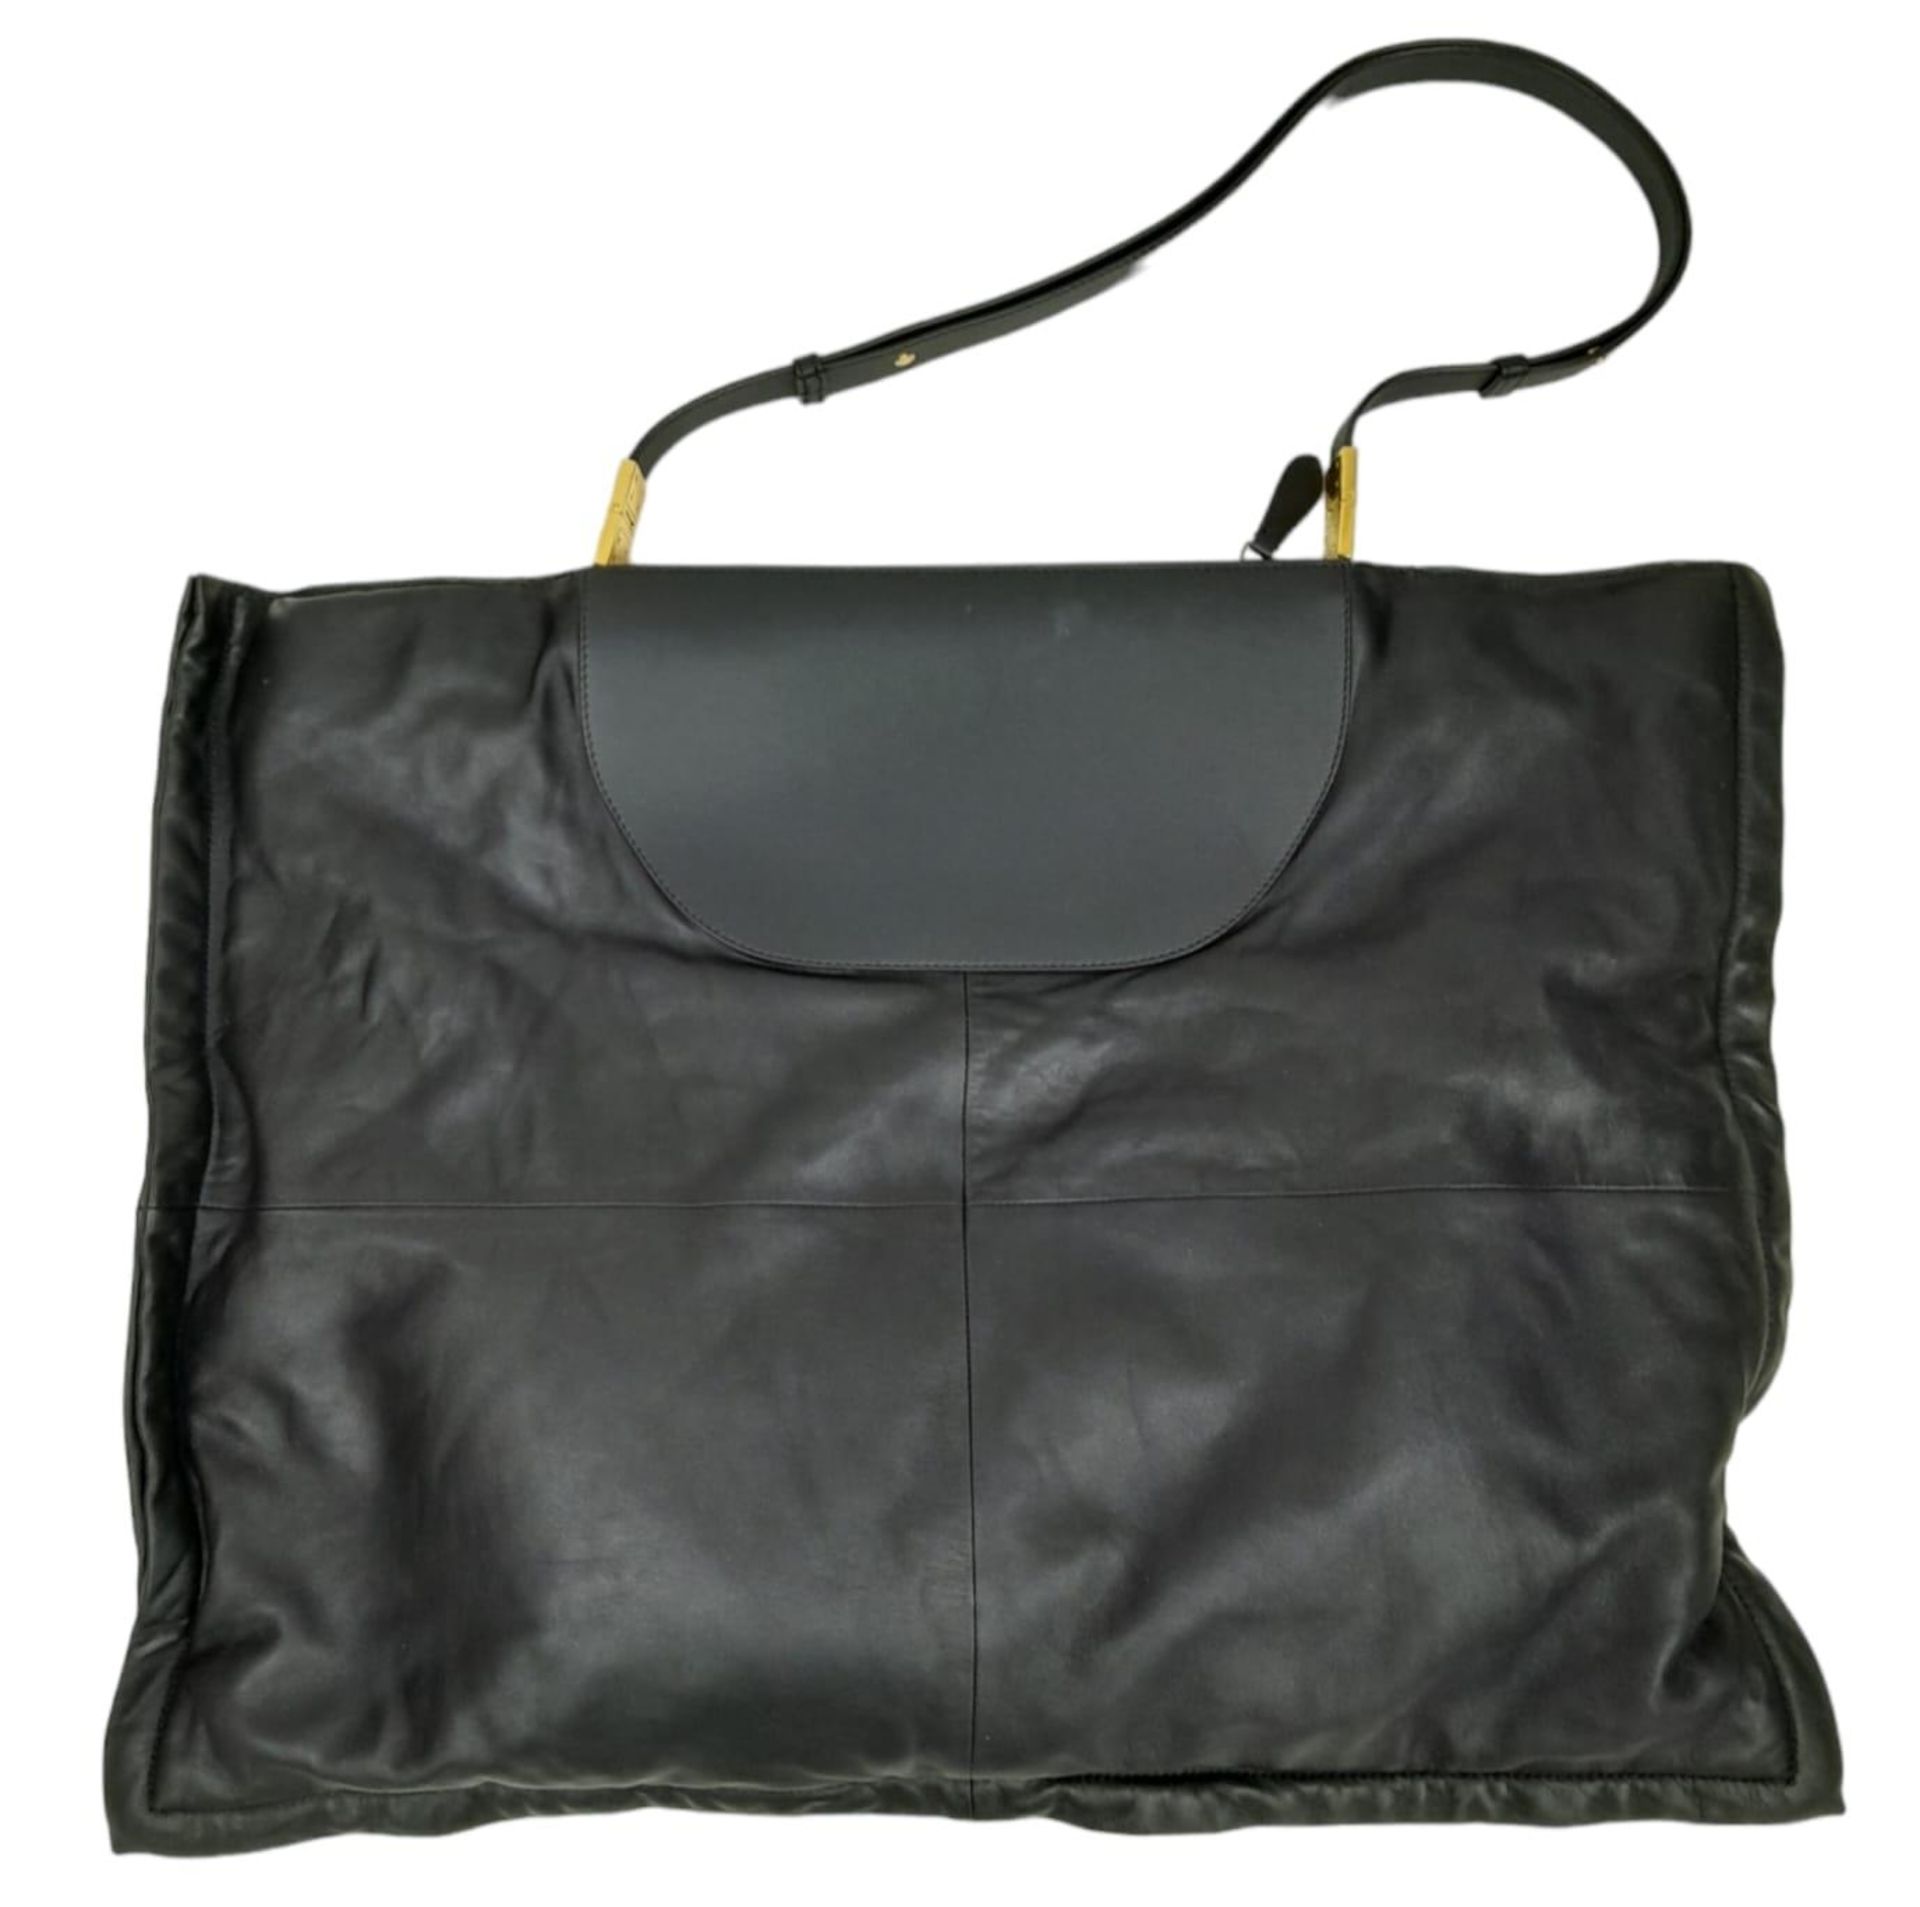 A Burberry Black Olympia Tote Bag. Soft leather exterior with gold-toned hardware, adjustable - Bild 2 aus 8